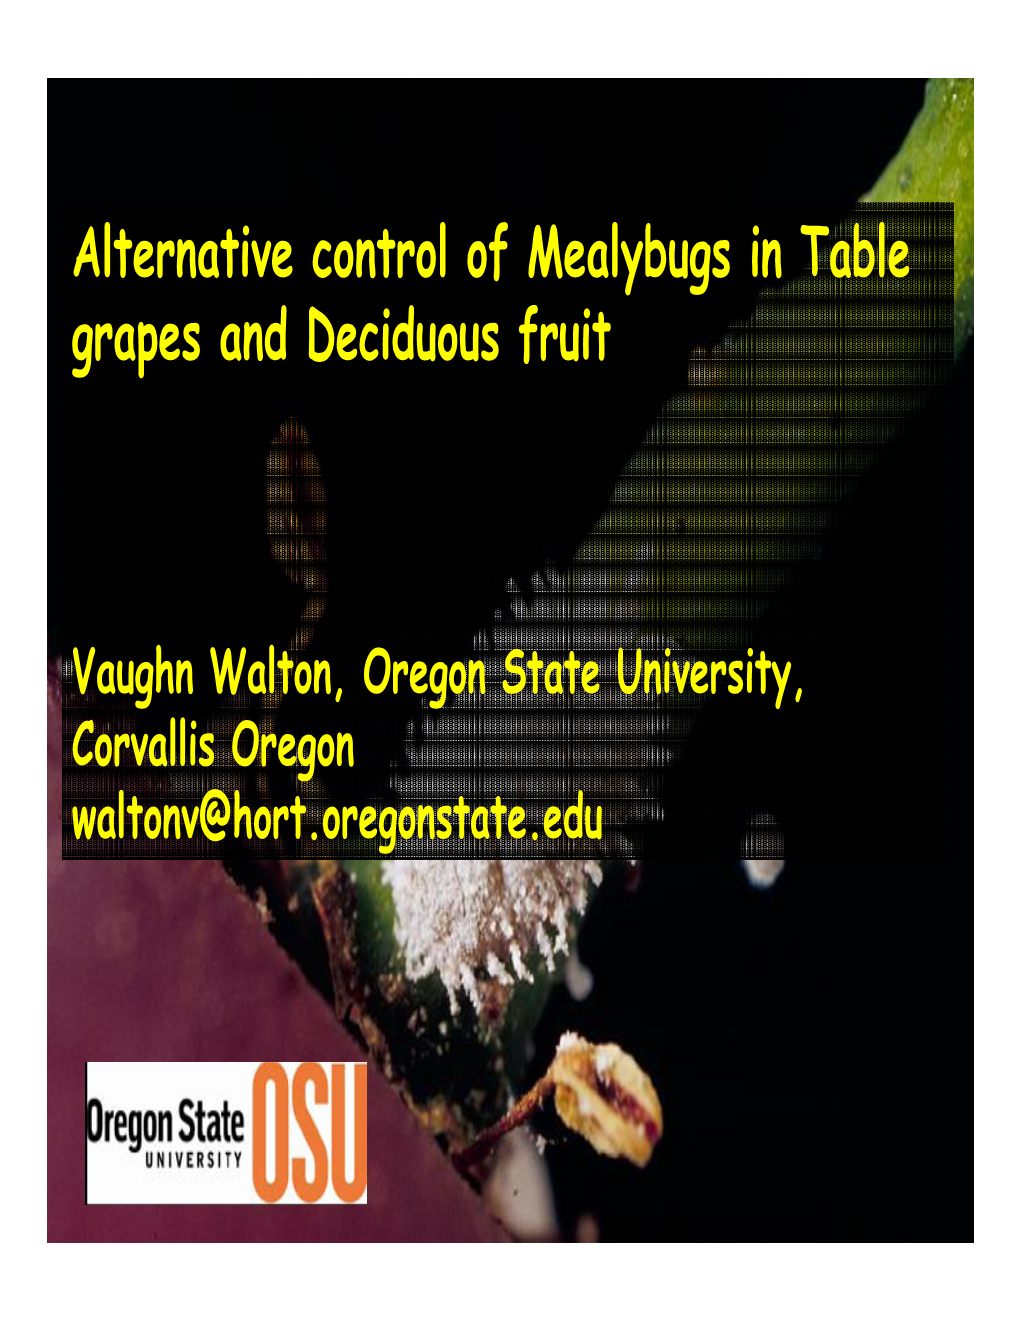 Alternative Control of Mealybugs in Table Grapes and Deciduous Fruit